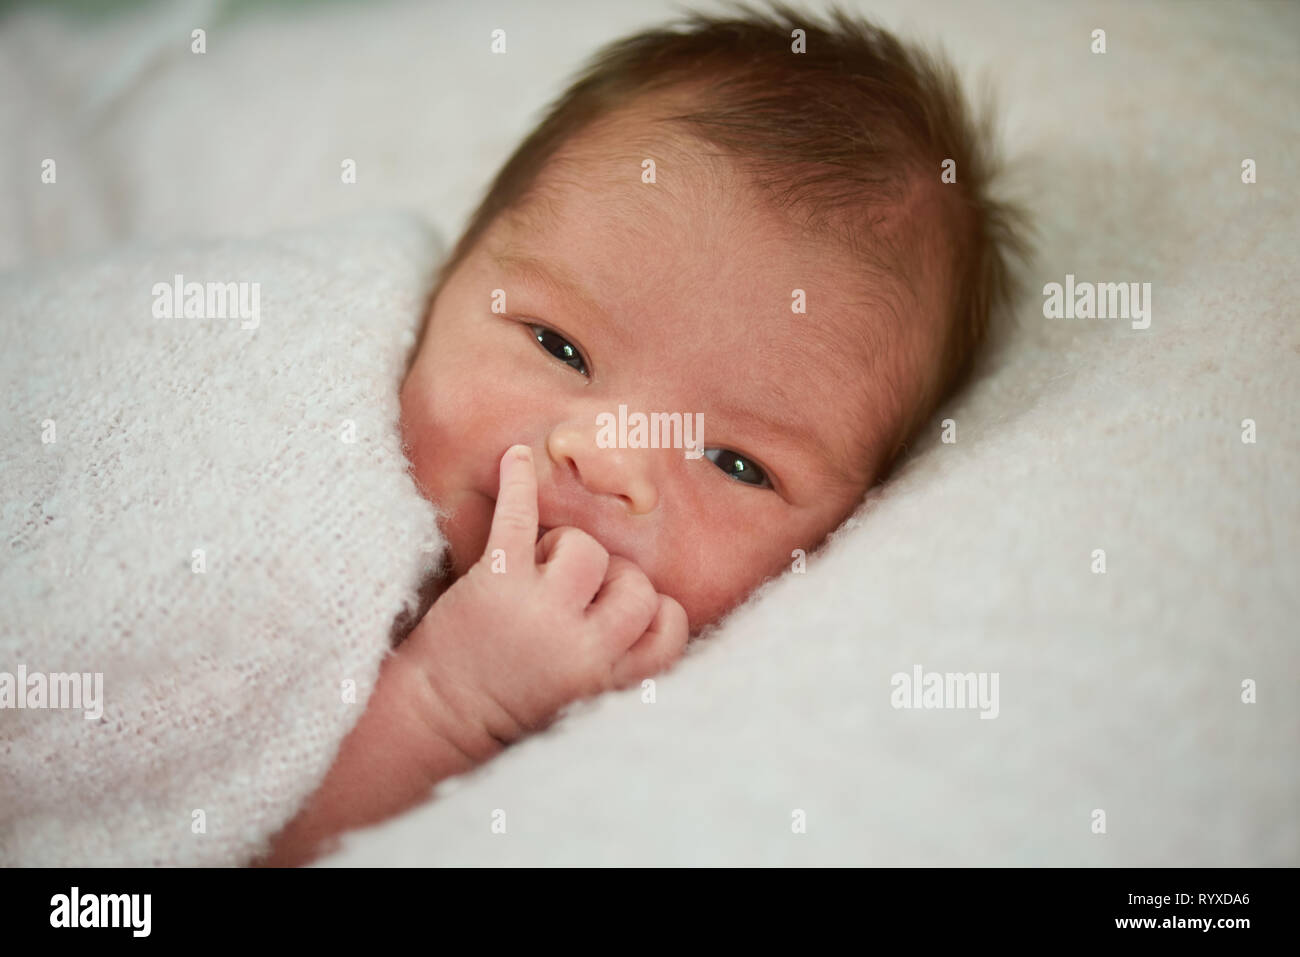 Cute newborn baby portrait with finger in mouth Stock Photo